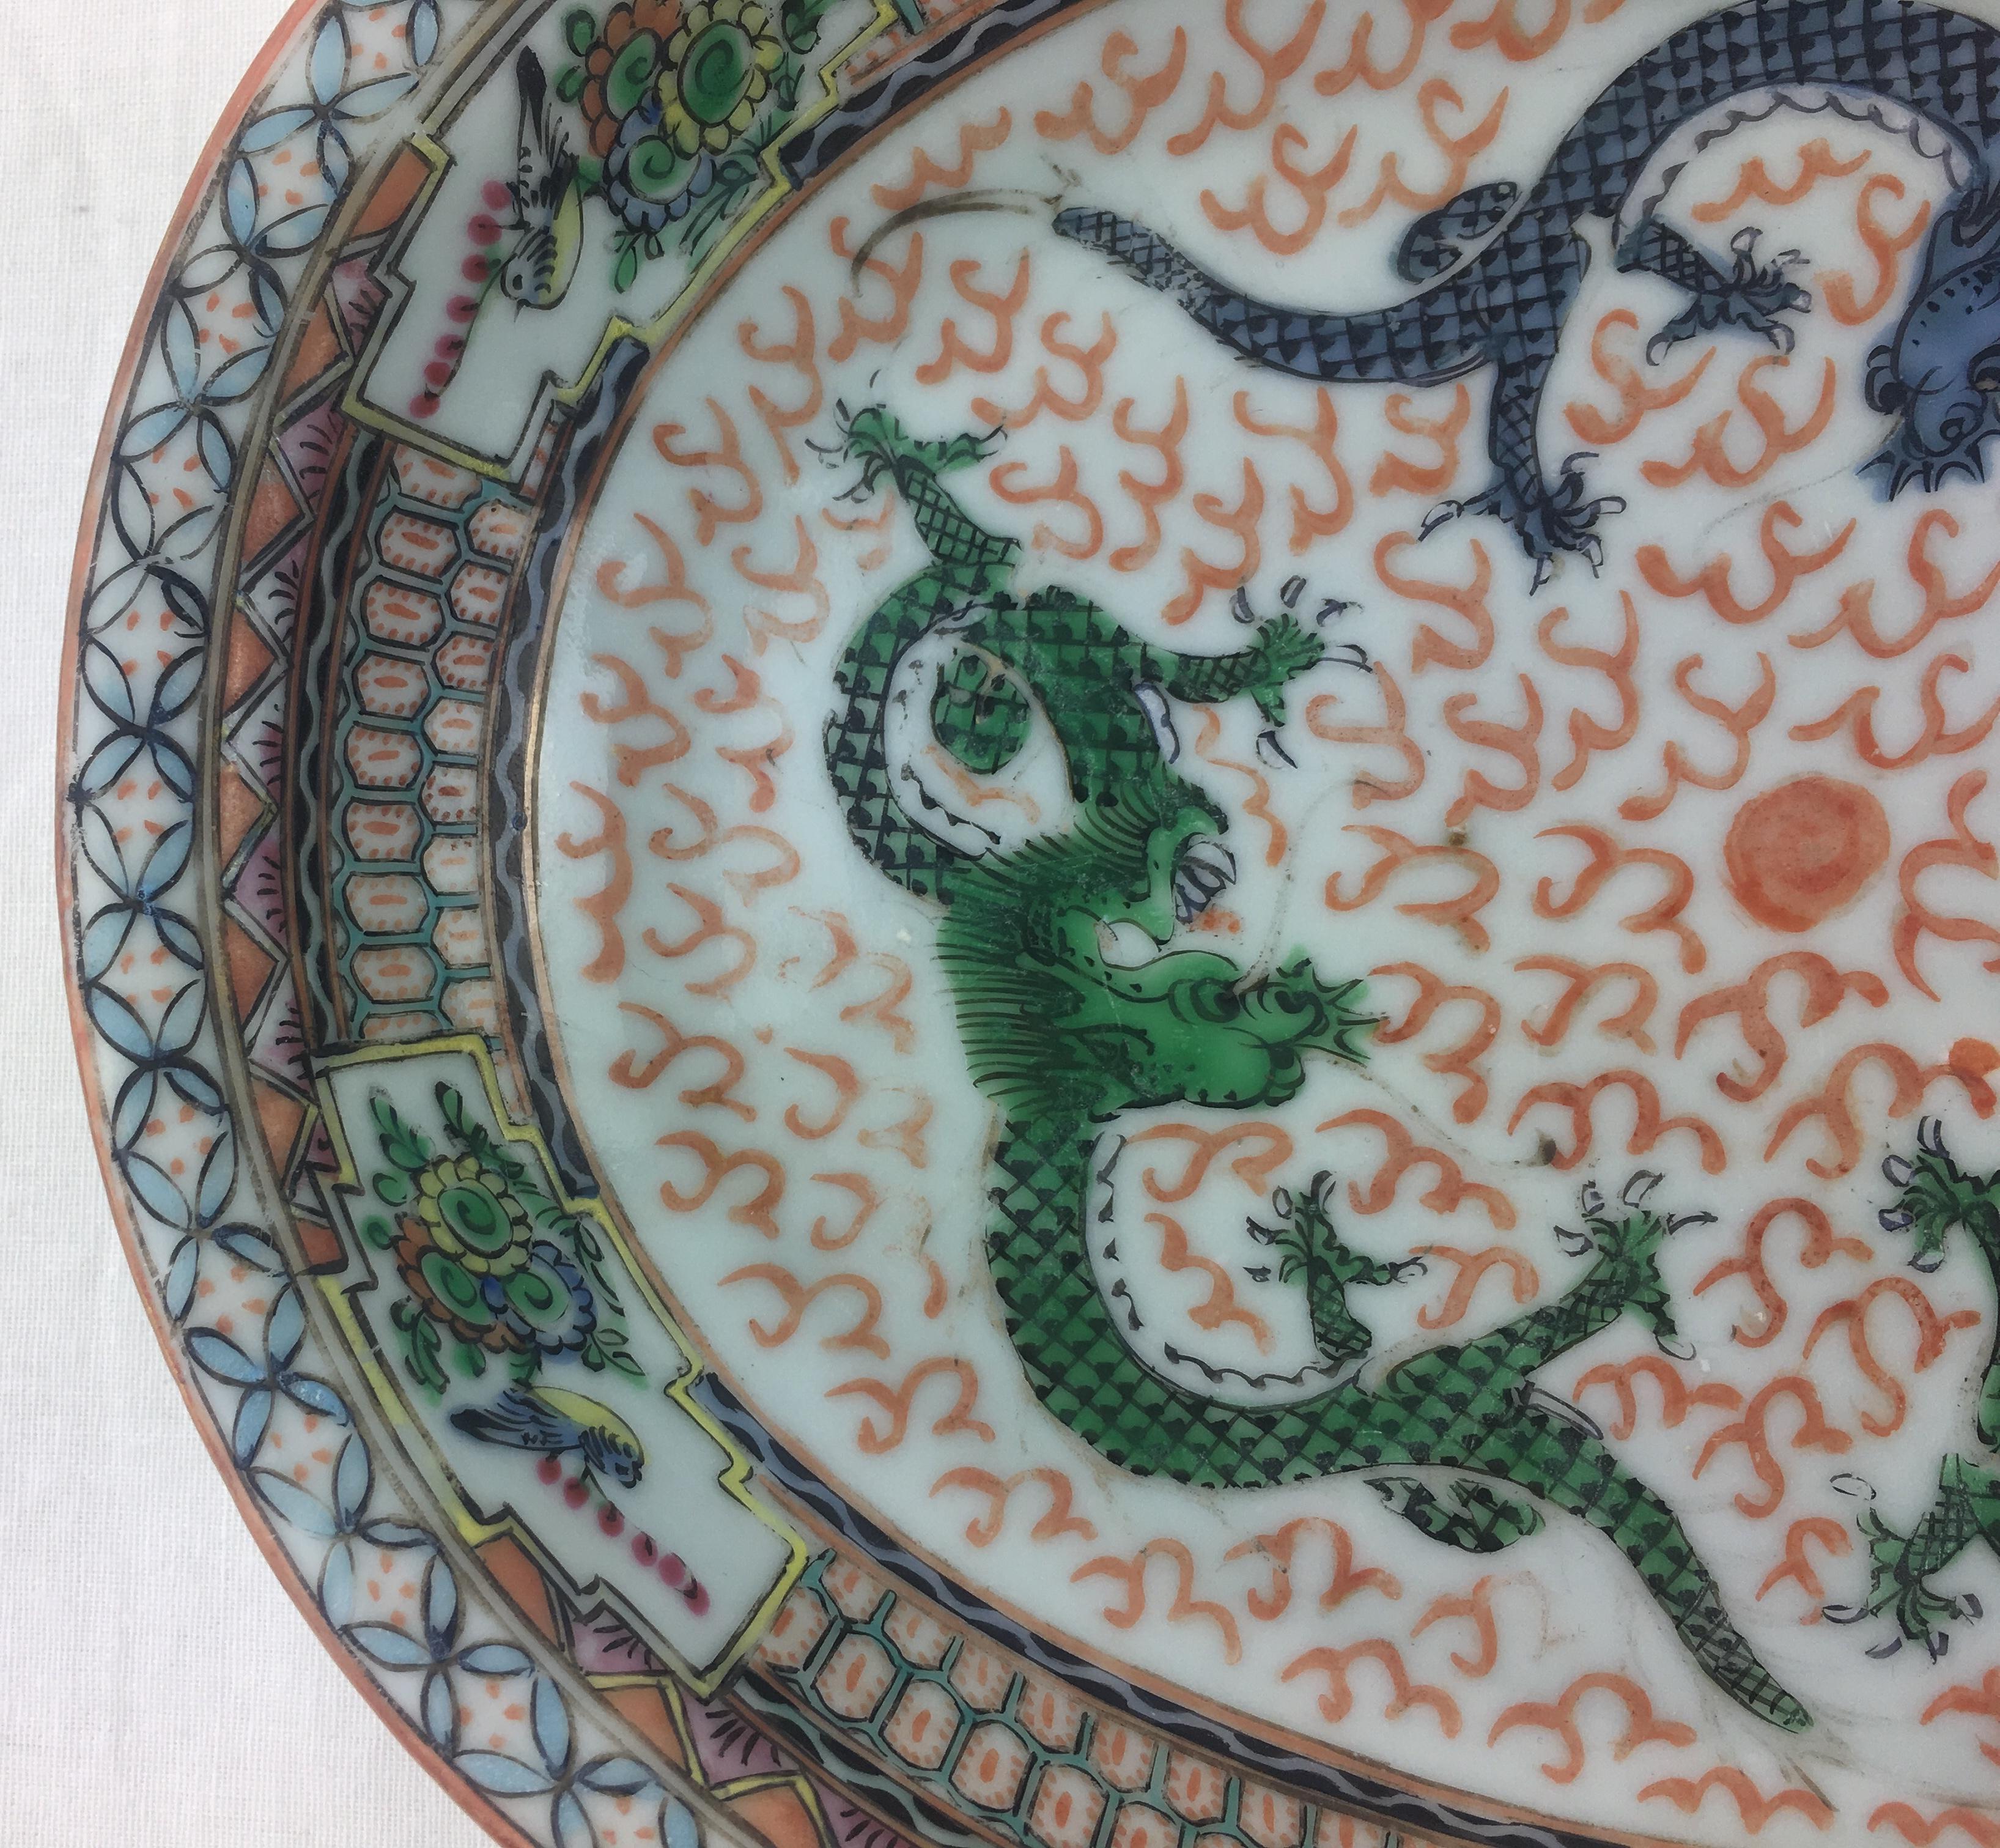 A good quality hand painted 20th century Chinese serving bowl adorned with dragons.

Dragons traditionally symbolize potent and auspicious powers, particularly control over water, rainfall, typhoons, and floods. They are also symbols of power,